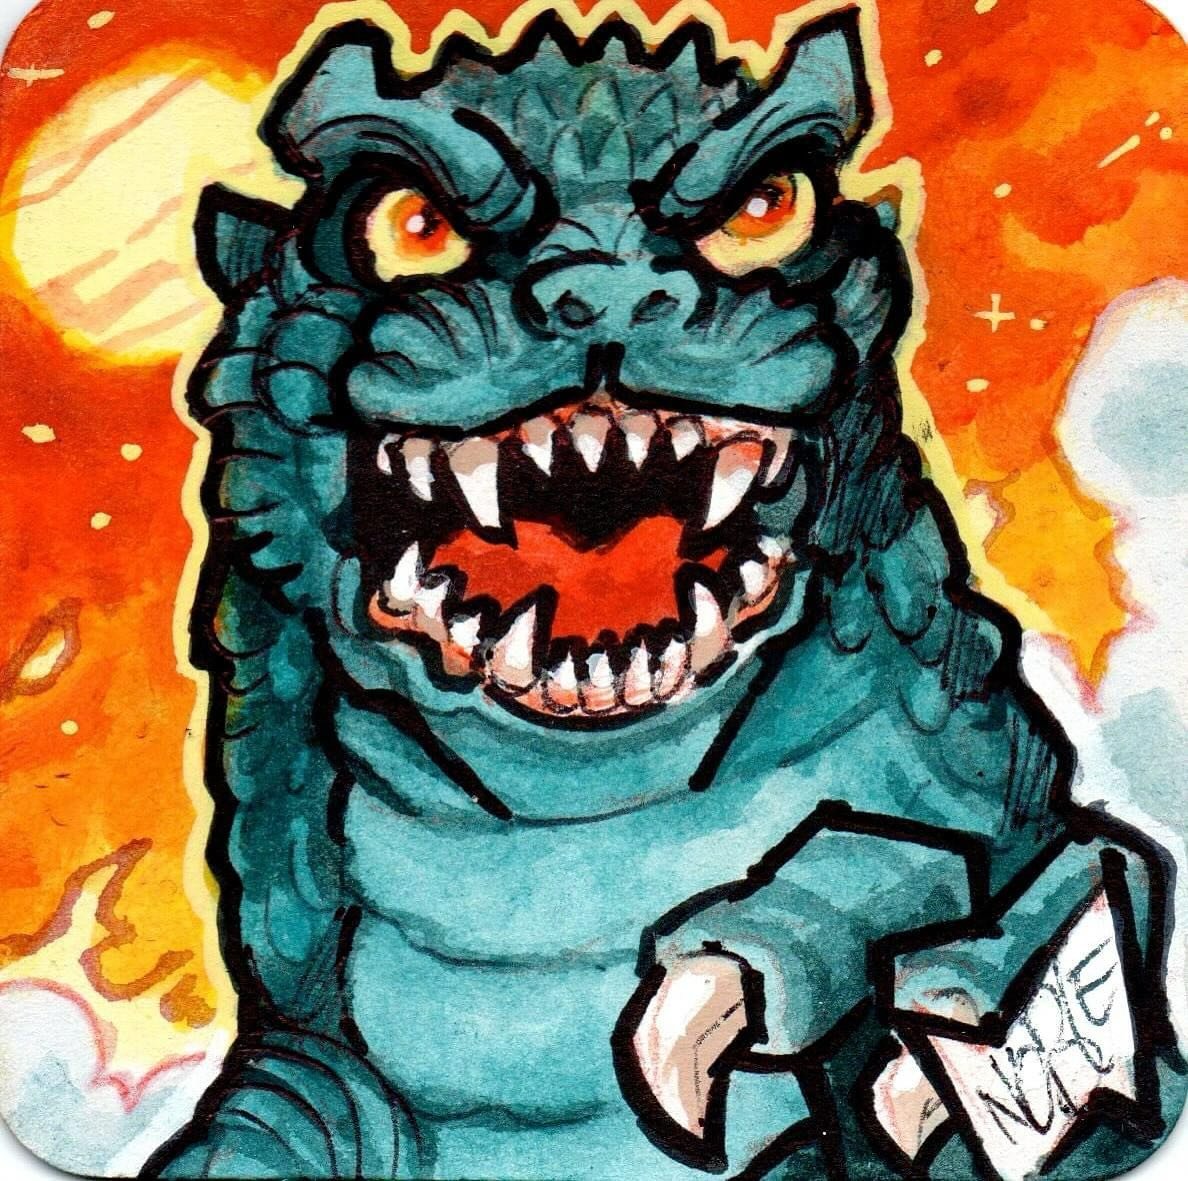 Scales (Godzilla)
4&rdquo; x 4&rdquo;
Mixed on coaster
2024
available
.
#marchart2024 day 2 prompt: Scales. One of my studies for my recent kaiju paintings. Love this guy!
.
.
.
.
.
.
.
#noblehardesty #kaijuart #marchart #godzillafanart #boiseartist 